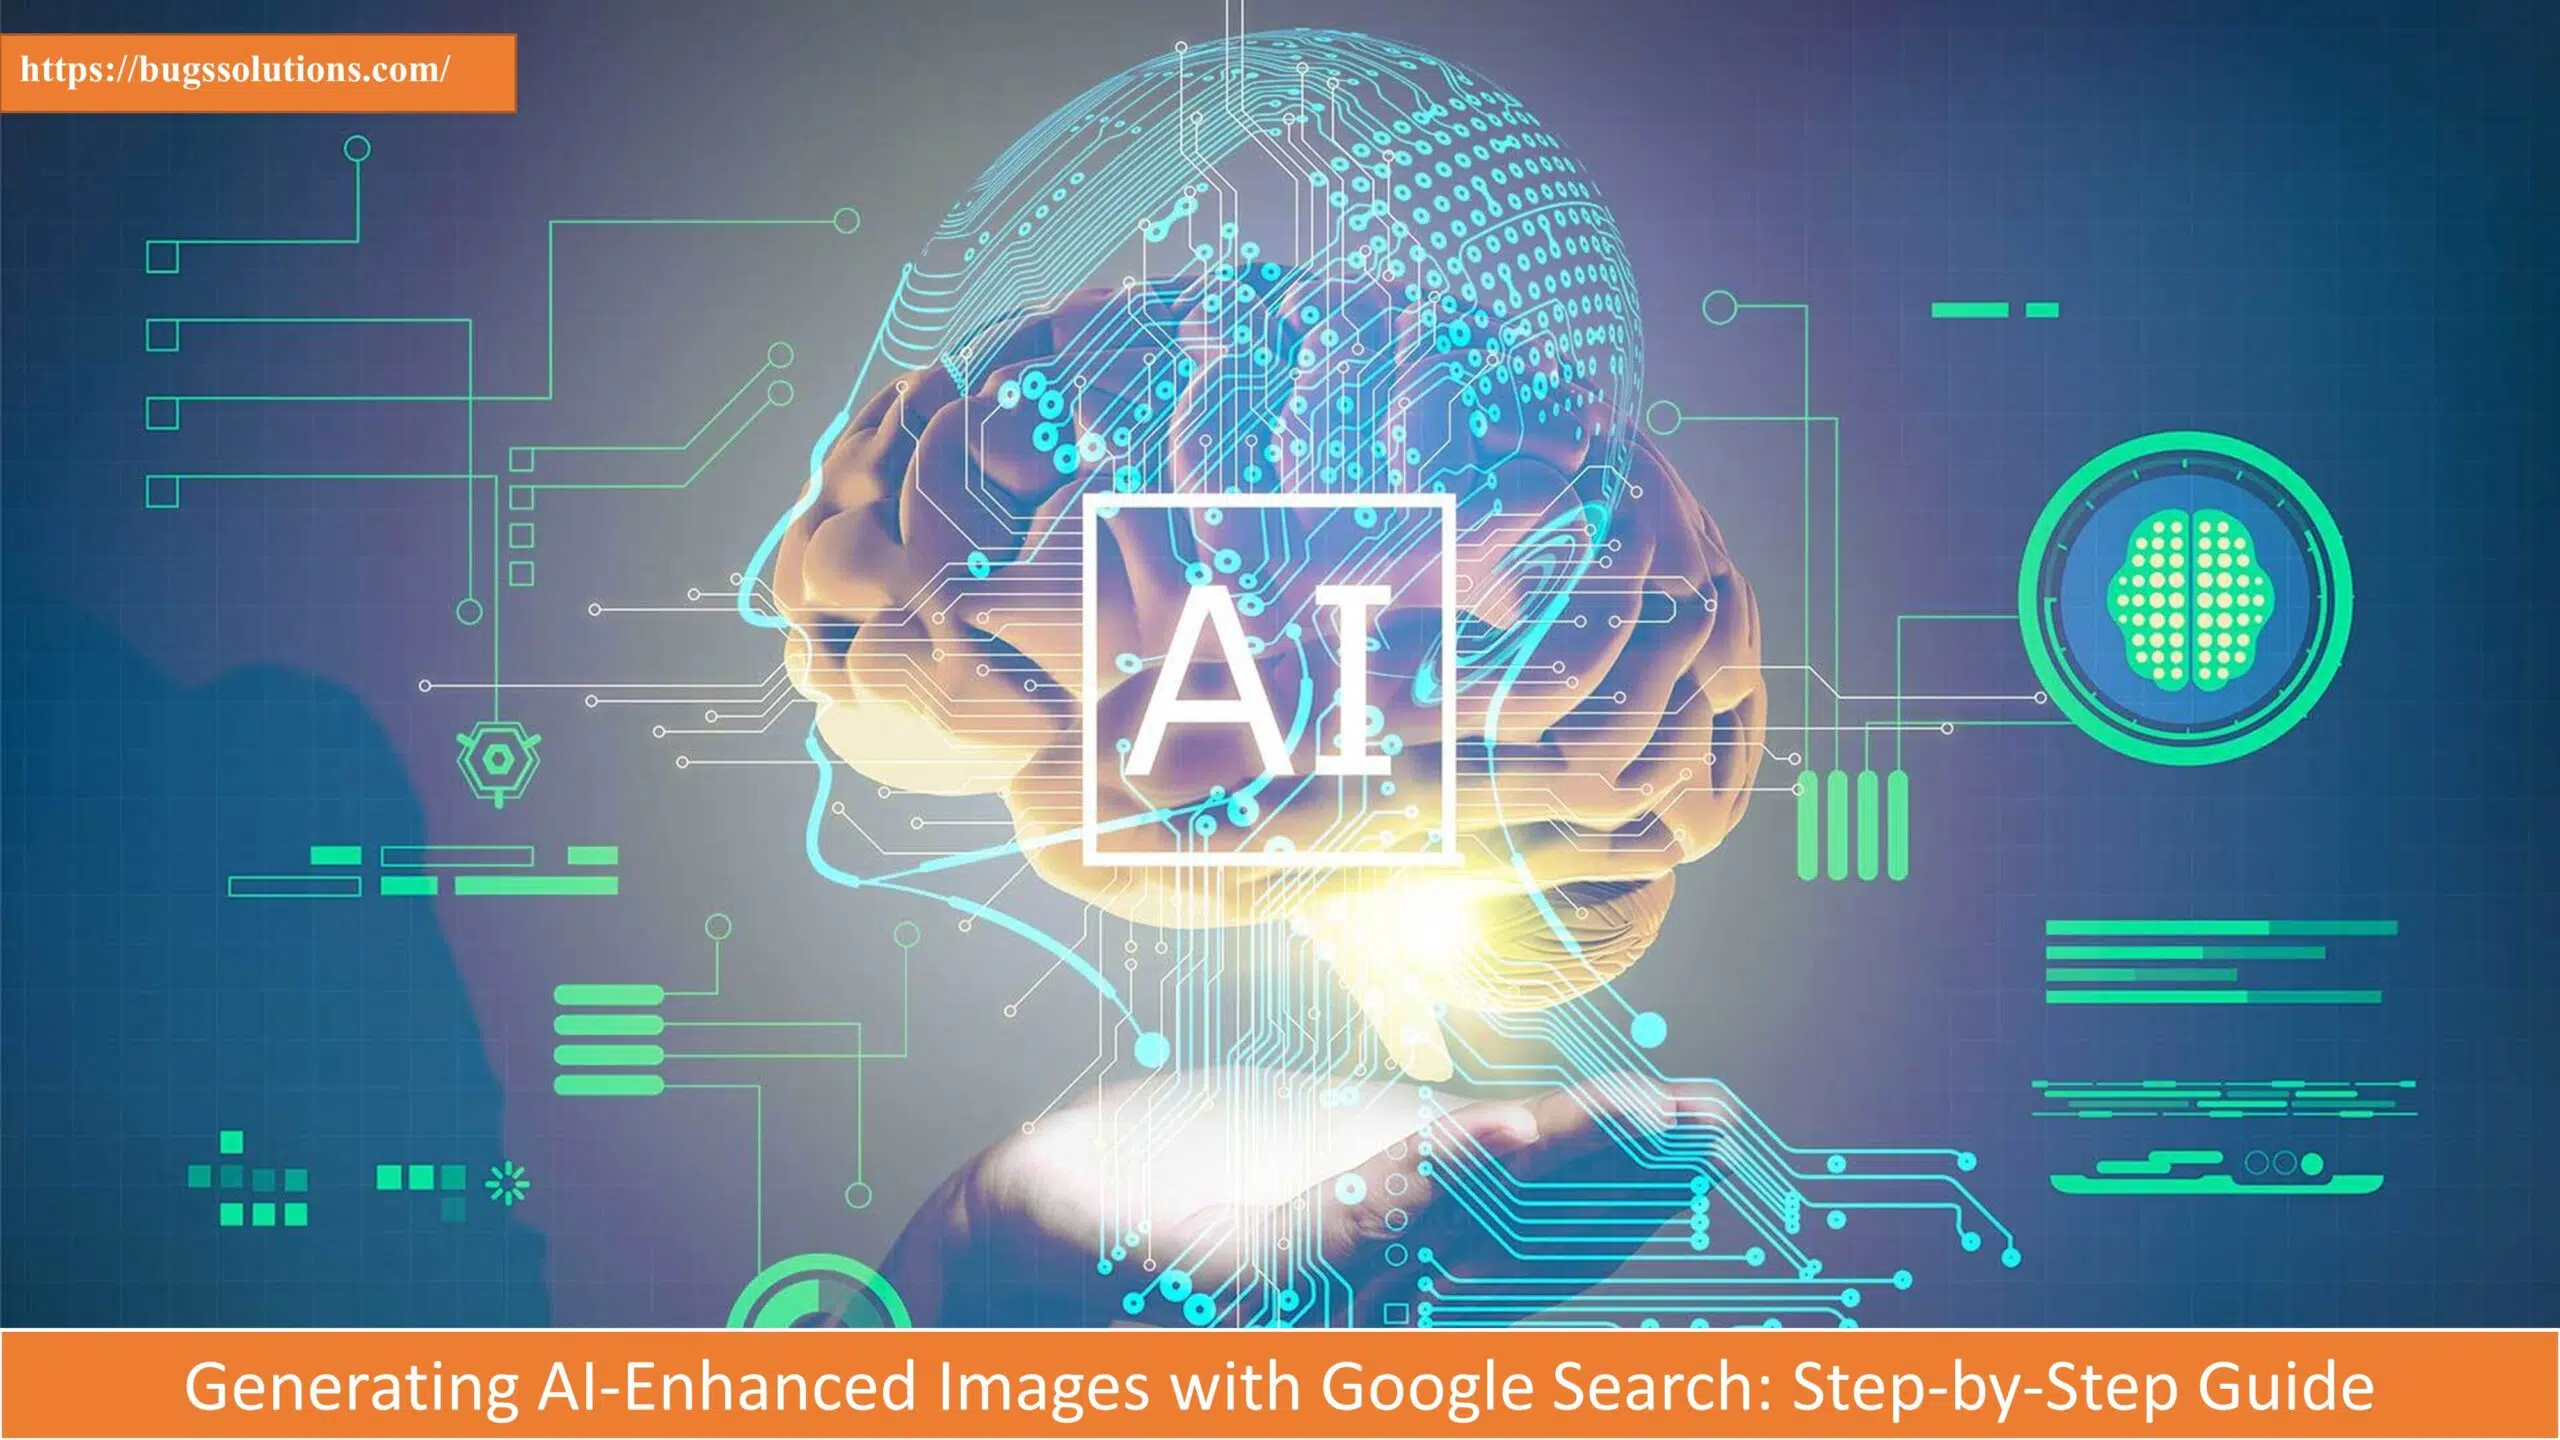 Generating AI-Enhanced Images with Google Search: Step-by-Step Guide